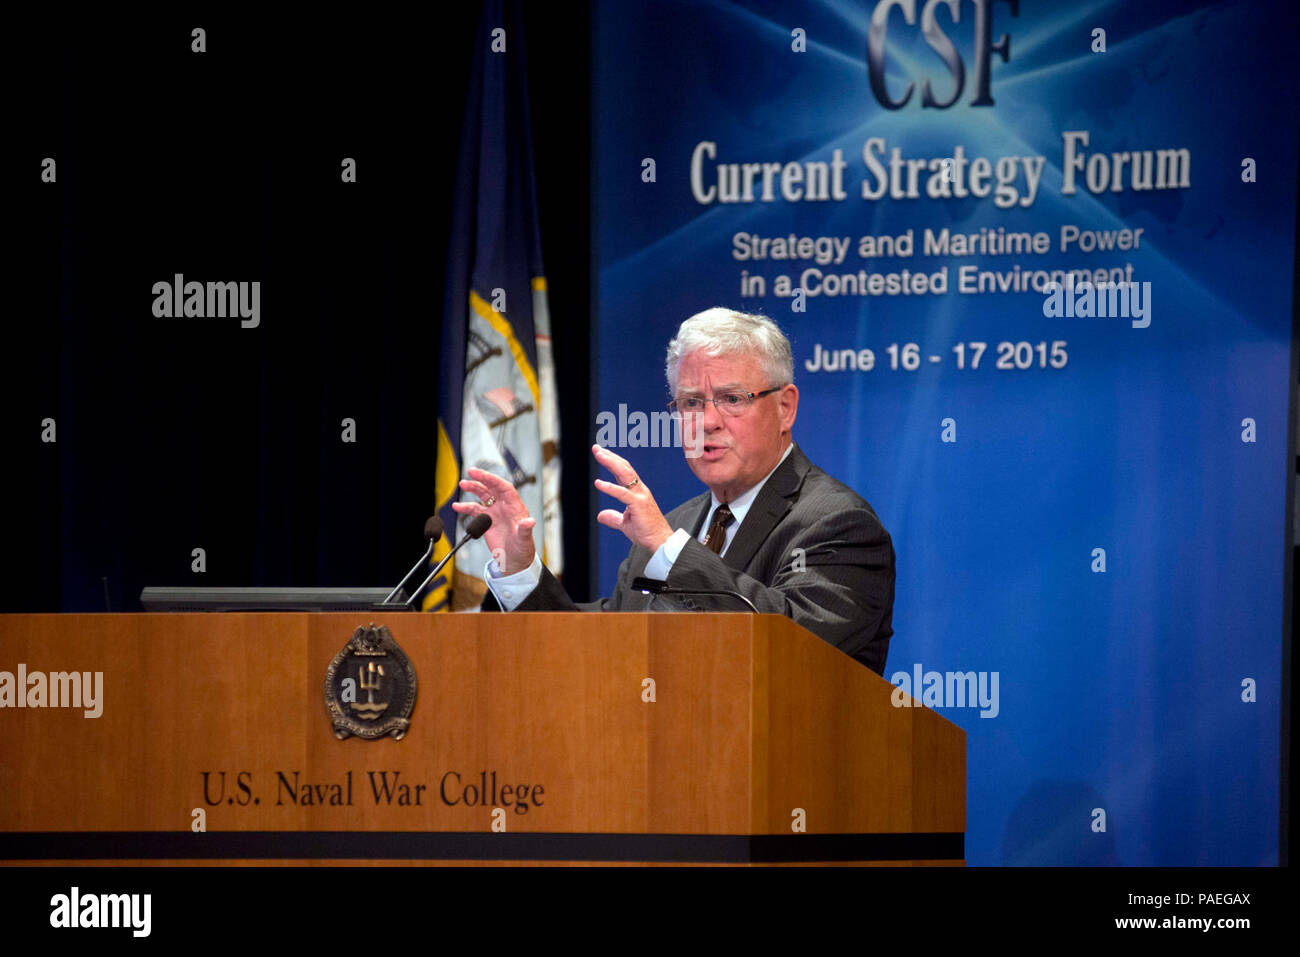 Newport, R.I. (June 17, 2015) Carlyle A. Thayer, Professor Emeritus at the University of South Wales at the Australian Defence Force Academy, speaks during the U.S. Naval War College (NWC) 2015 Current Strategy Forum in Newport, R.I. As NWC's capstone event, the two-day forum brings together students and distinguished guests to explore issues of strategic national importance. This year's theme, 'Strategic and Maritime Power in a Contested Environment,' focused on the critical problems affecting our nation's security and well-being. Stock Photo